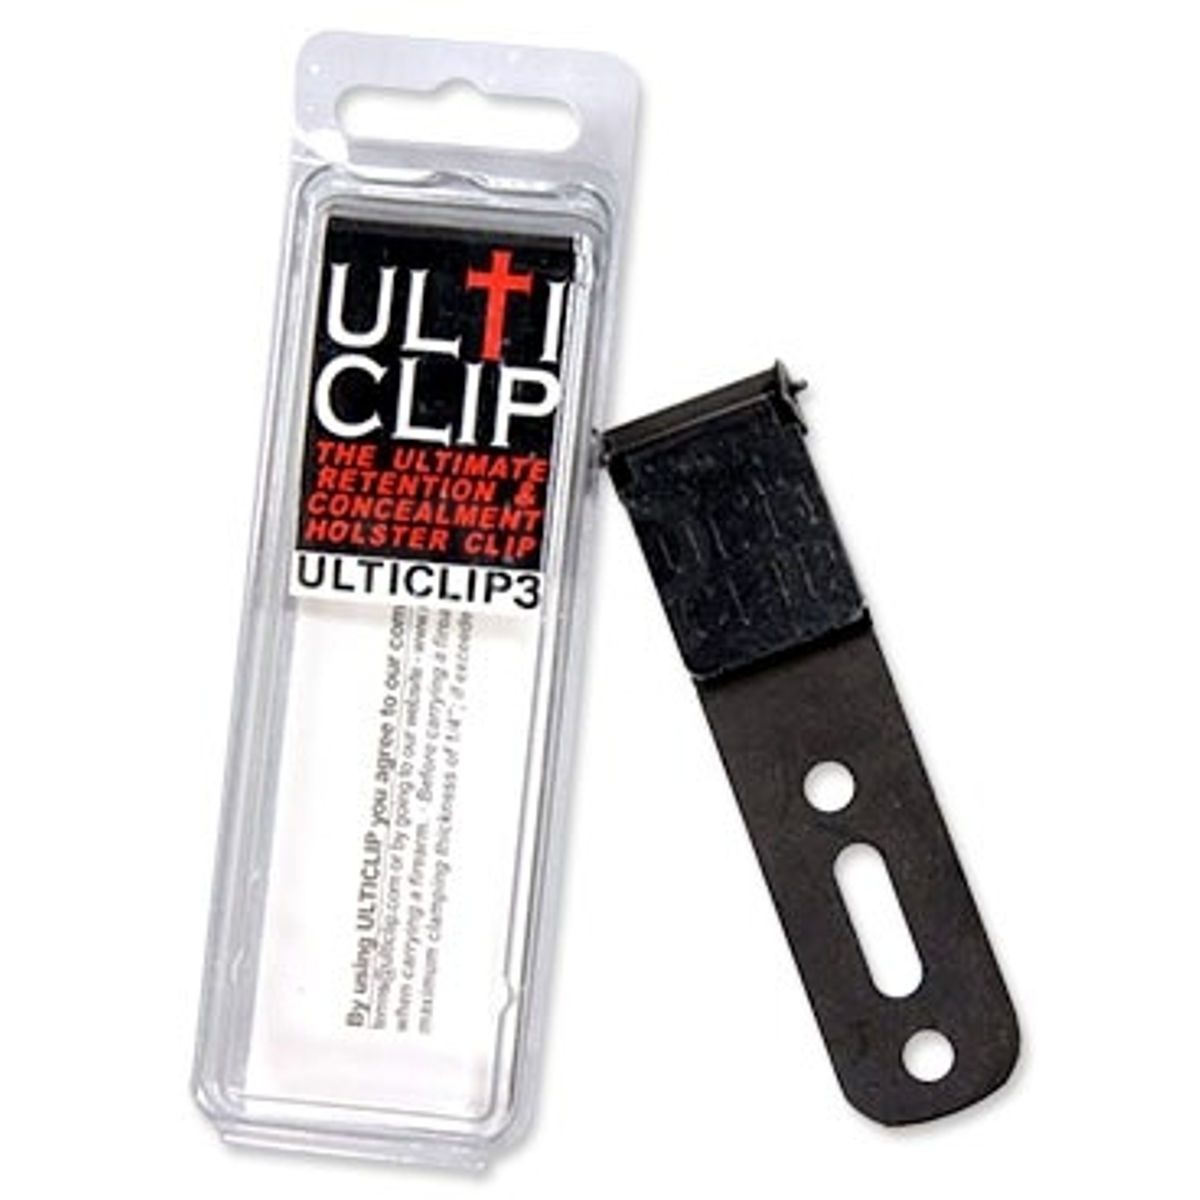 Ulticlip for IWB holster